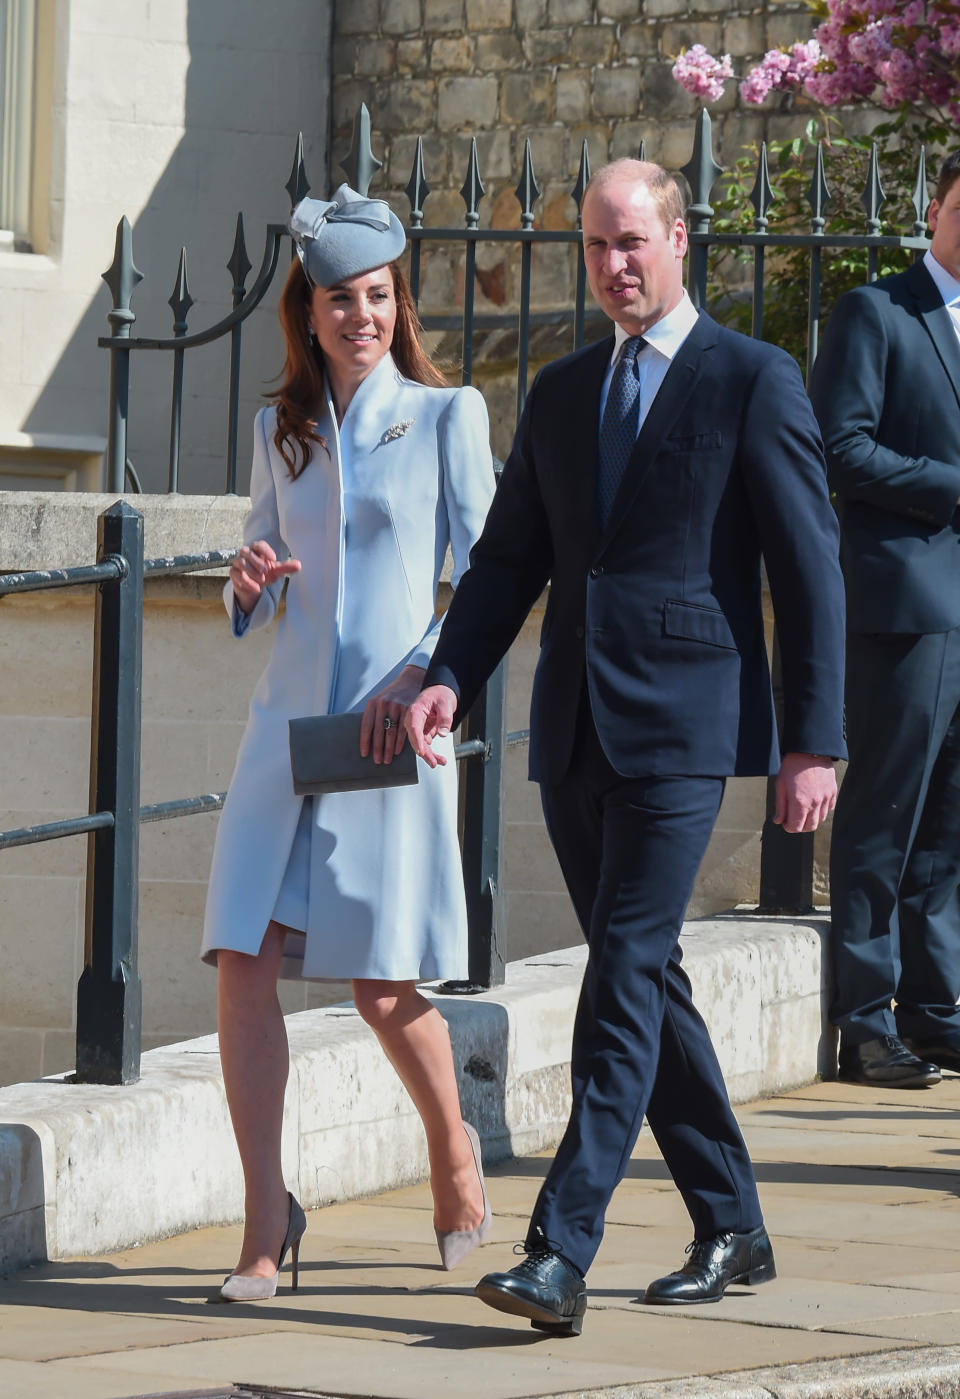 For the Easter Sunday service at St George’s Chapel in Windsor, Kate repeated her dove grey Alexander McQueen coat with her Jane Taylor hat from her tour of Australia 2014. Her grey accessories are both by Emmy London. [Photo: PA]